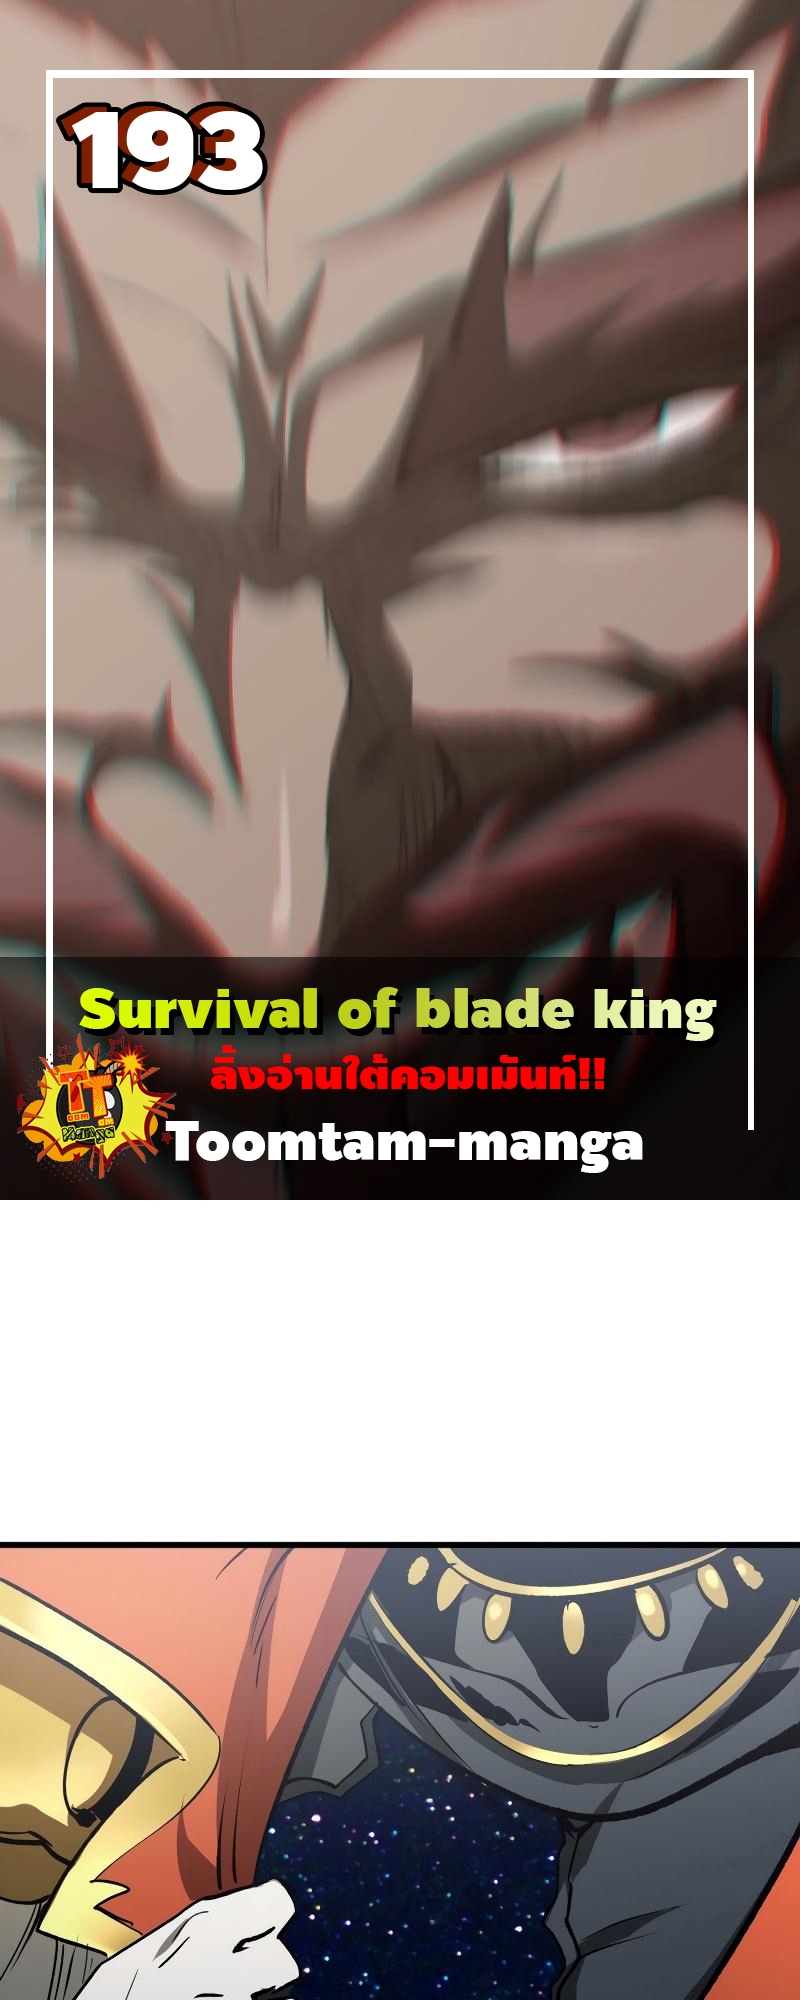 Survival of blade king 193 19 2 25670001